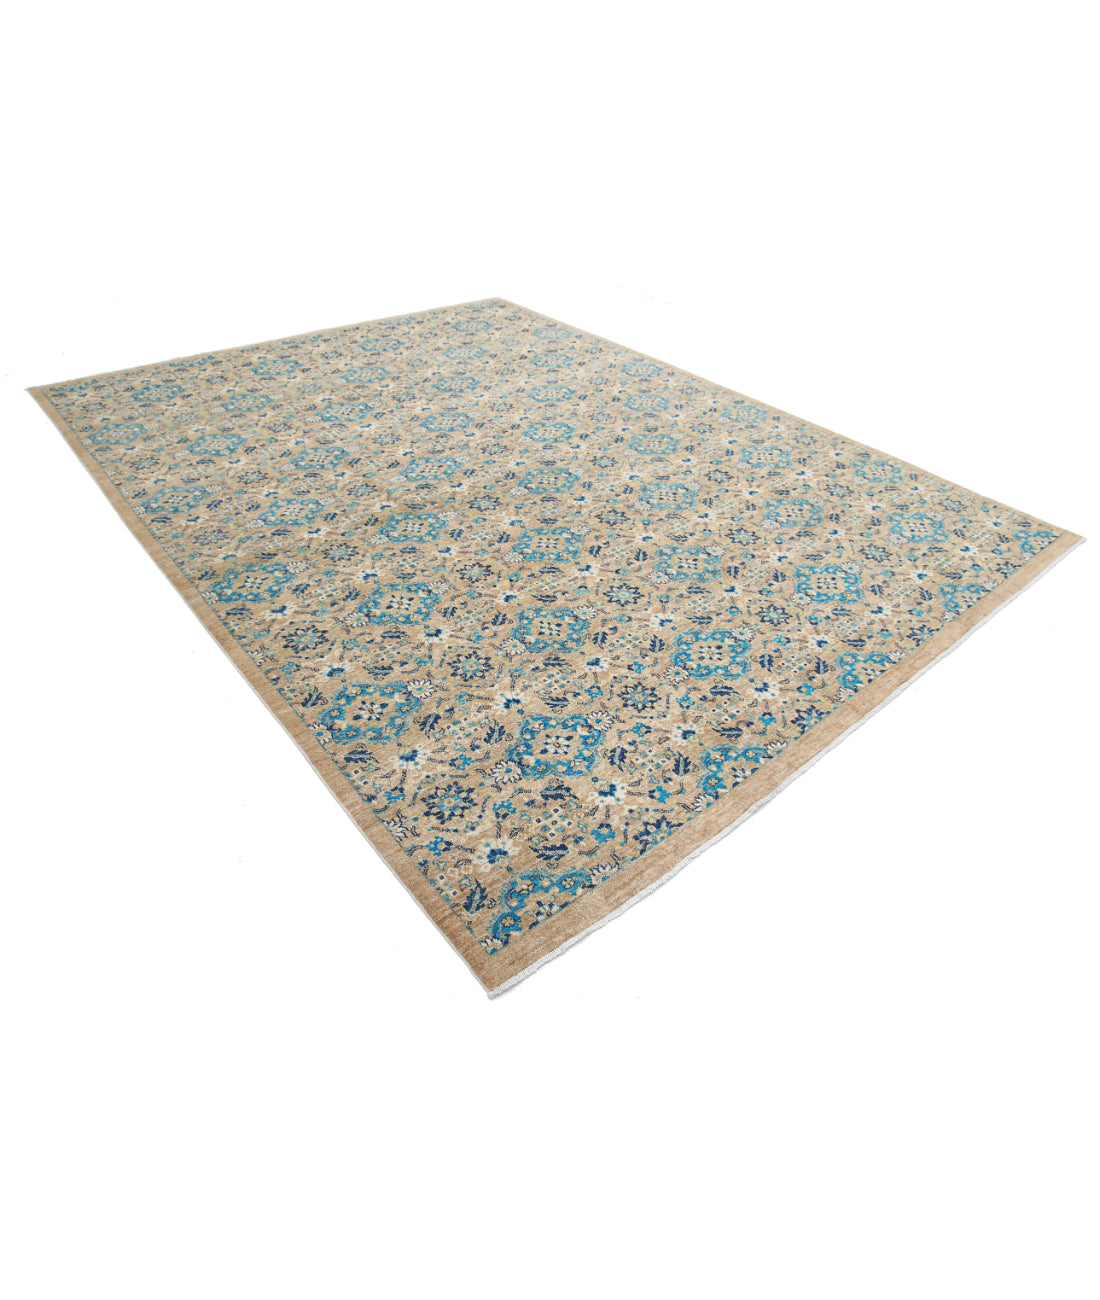 Hand Knotted Art & Craft Wool Rug - 8'10'' x 11'7'' 8'10'' x 11'7'' (265 X 348) / Taupe / Blue